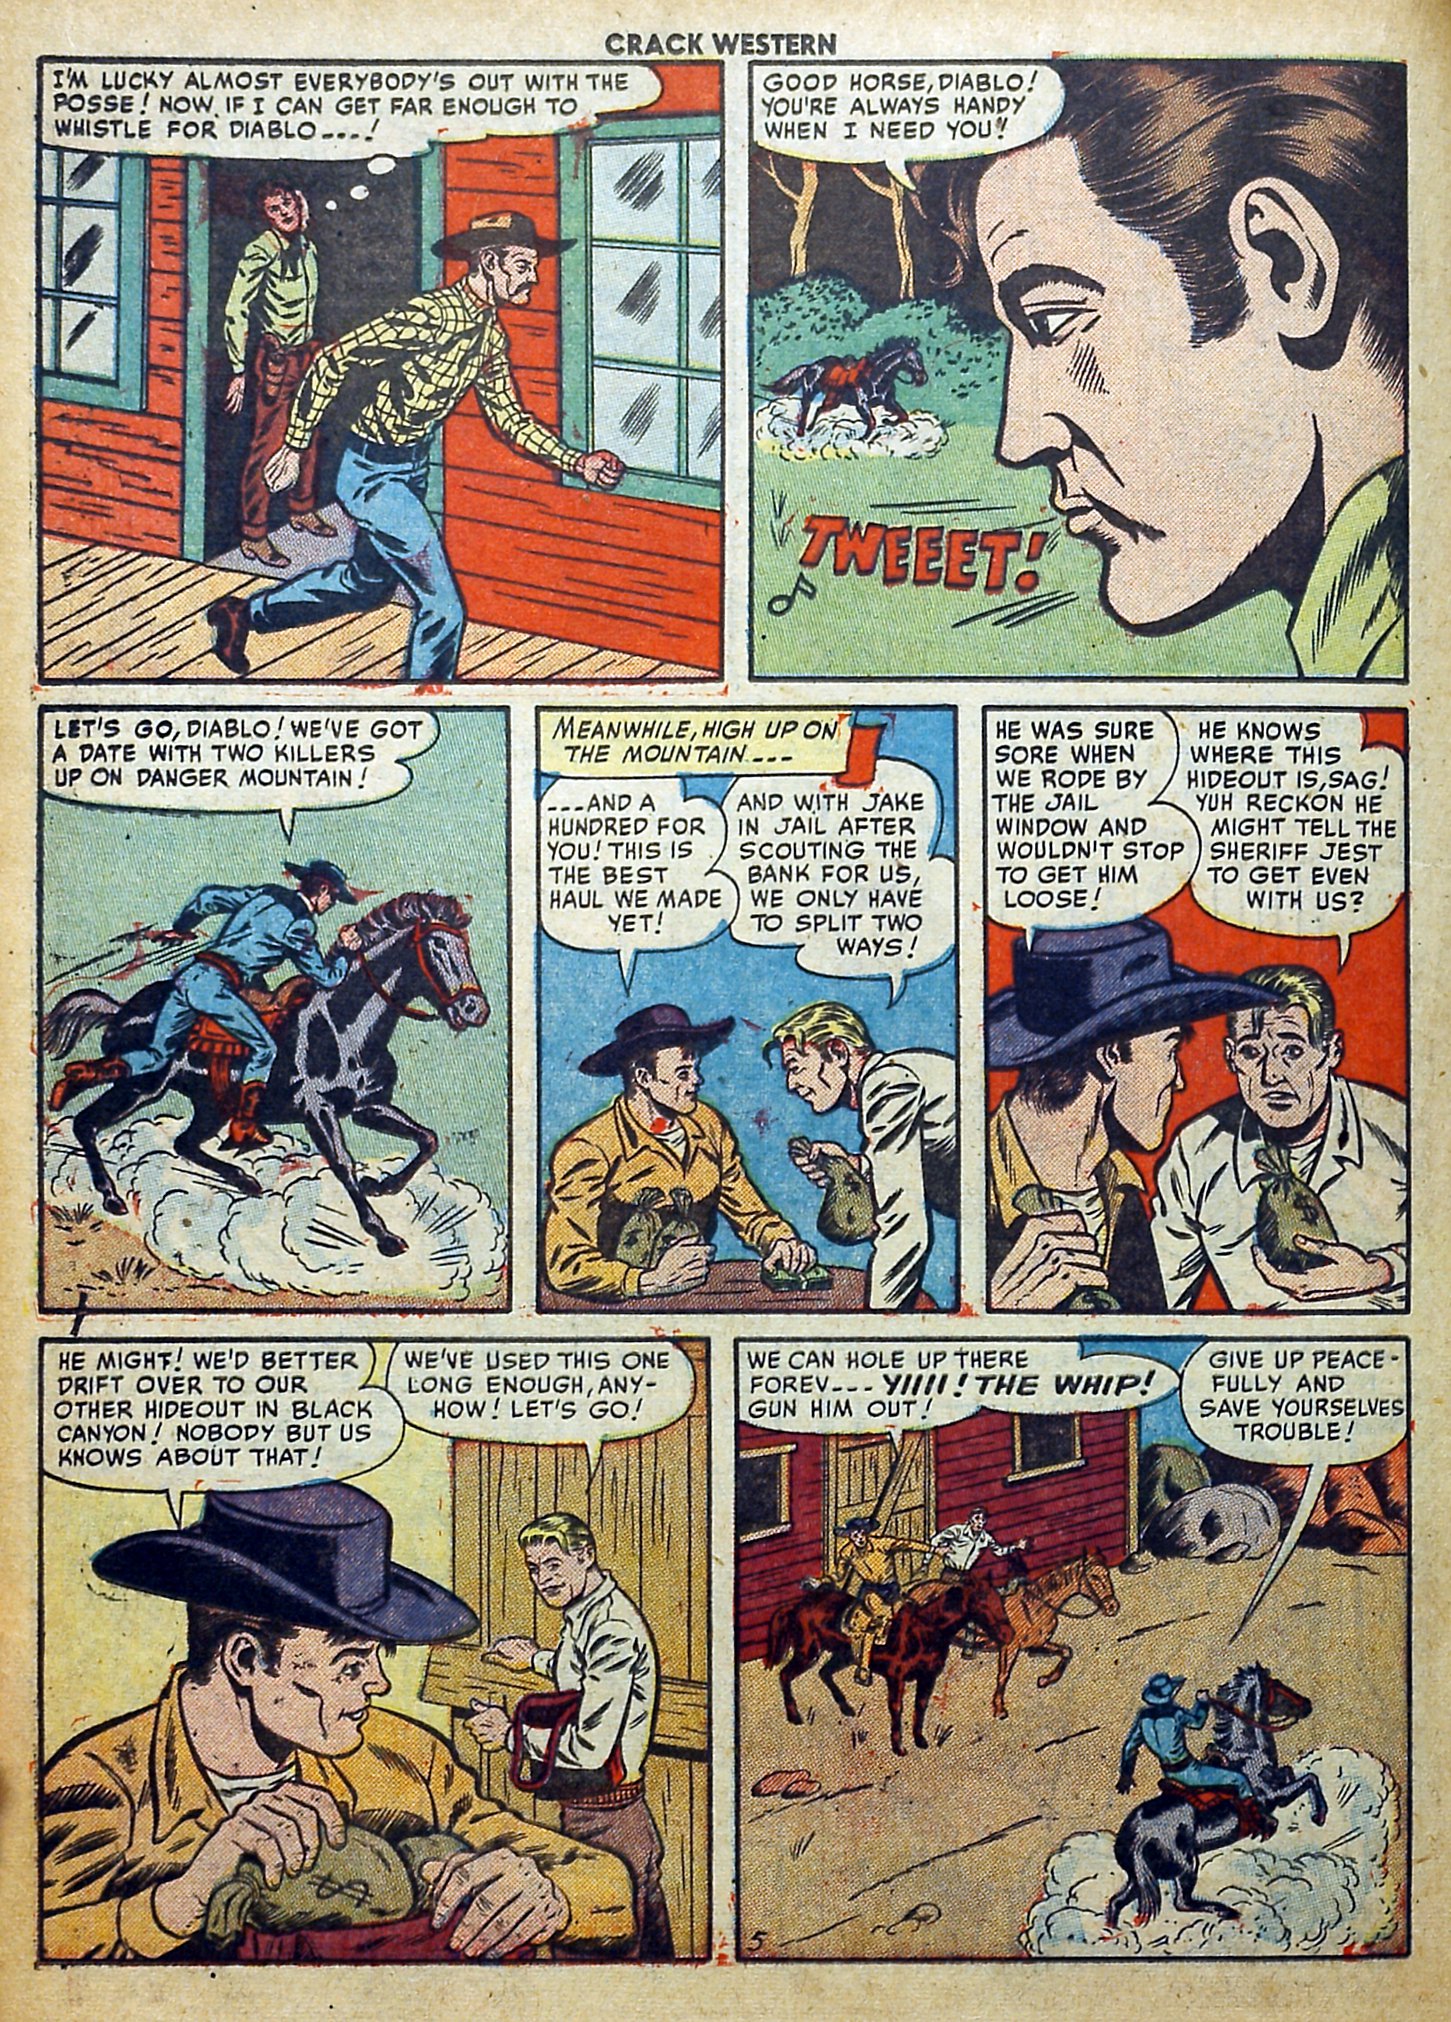 Read online Crack Western comic -  Issue #75 - 22